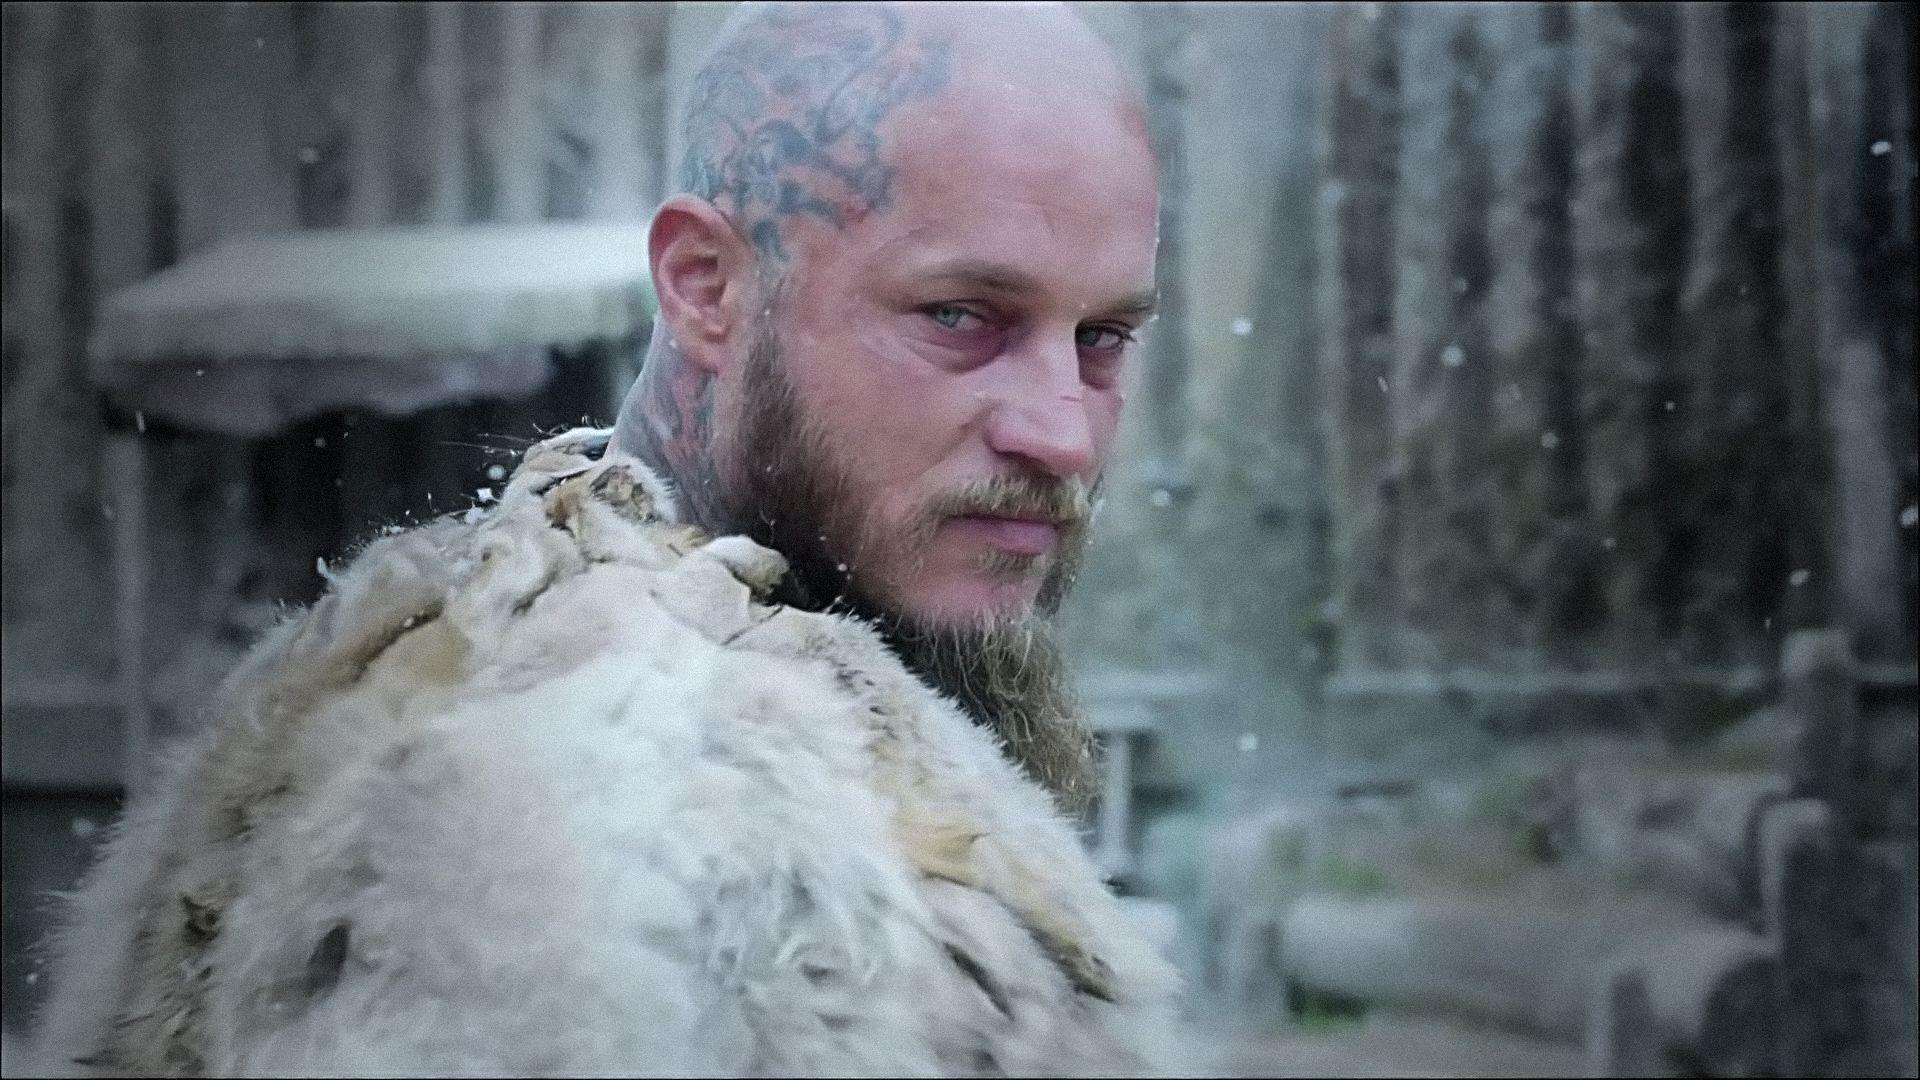 Vikings season 4 official trailer and a pack of wallpaper